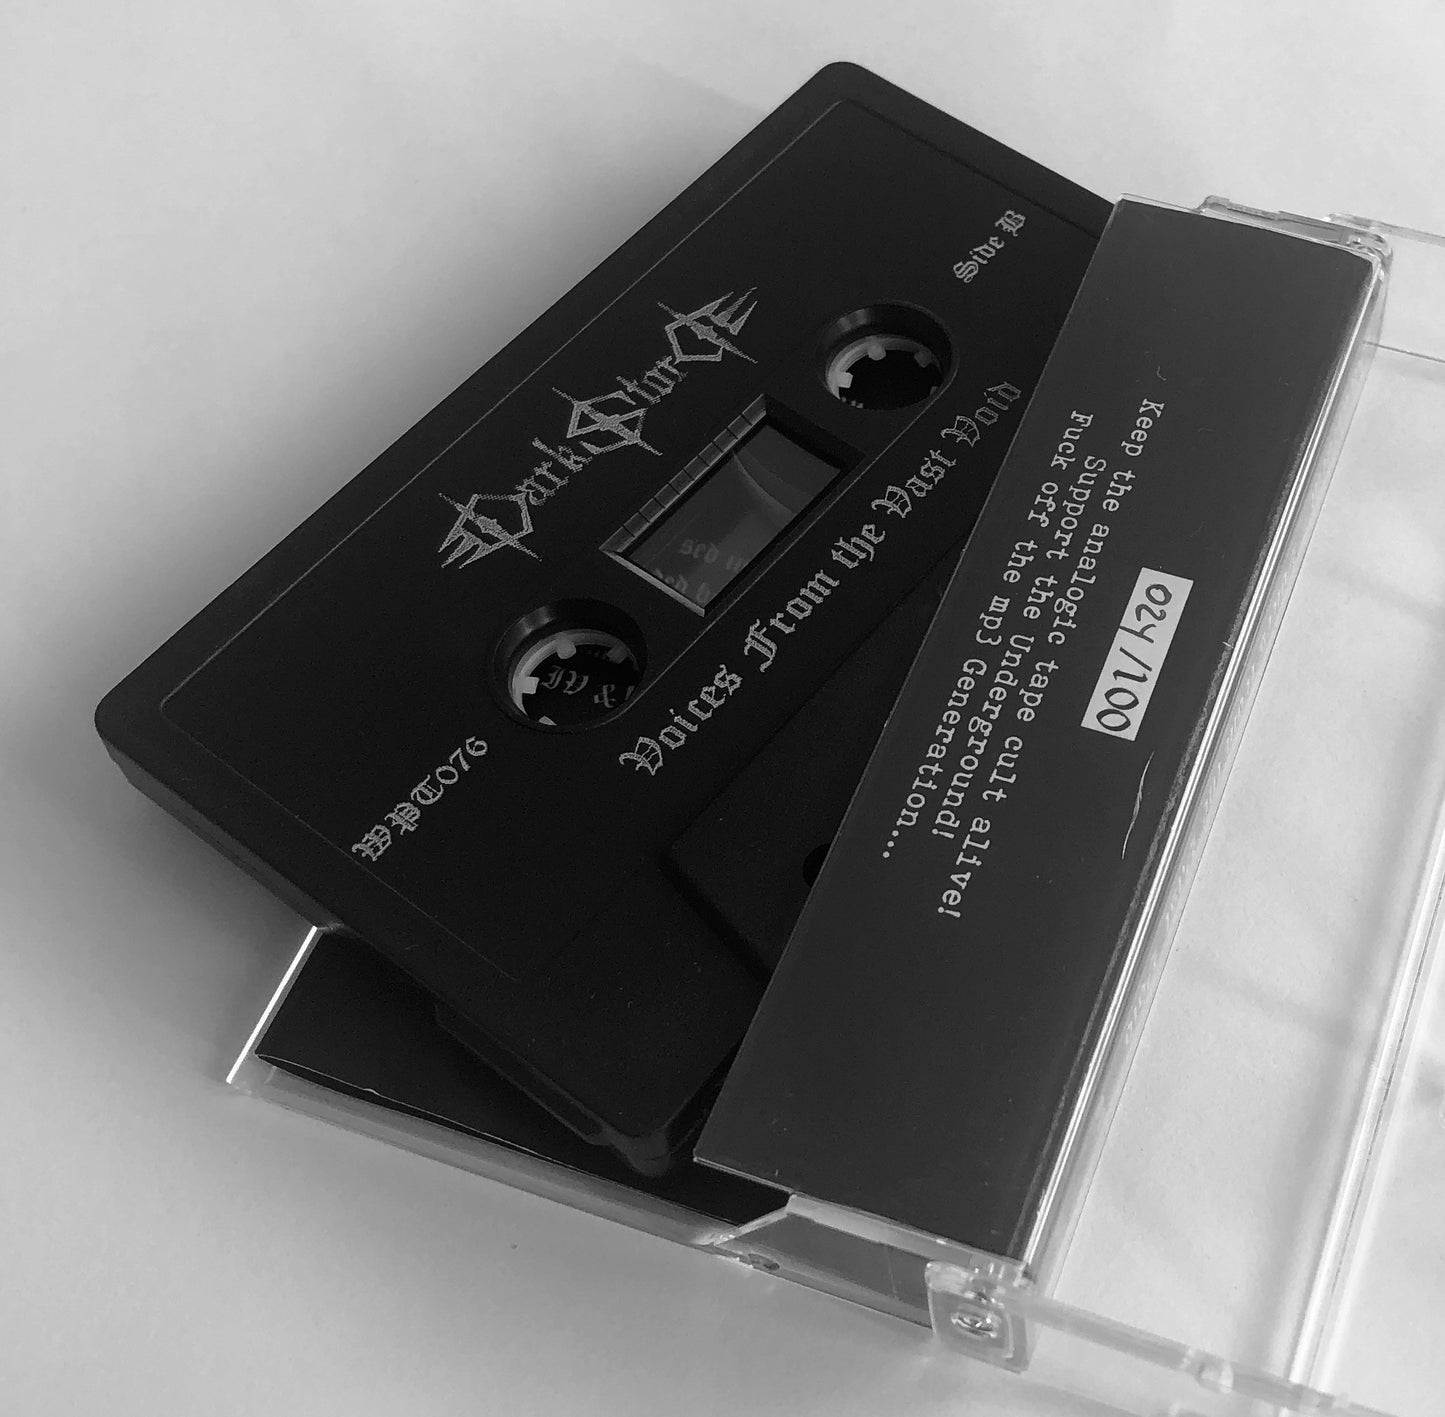 Dark Storm (Pol) "Voices From the Vast Void" - Pro Tape